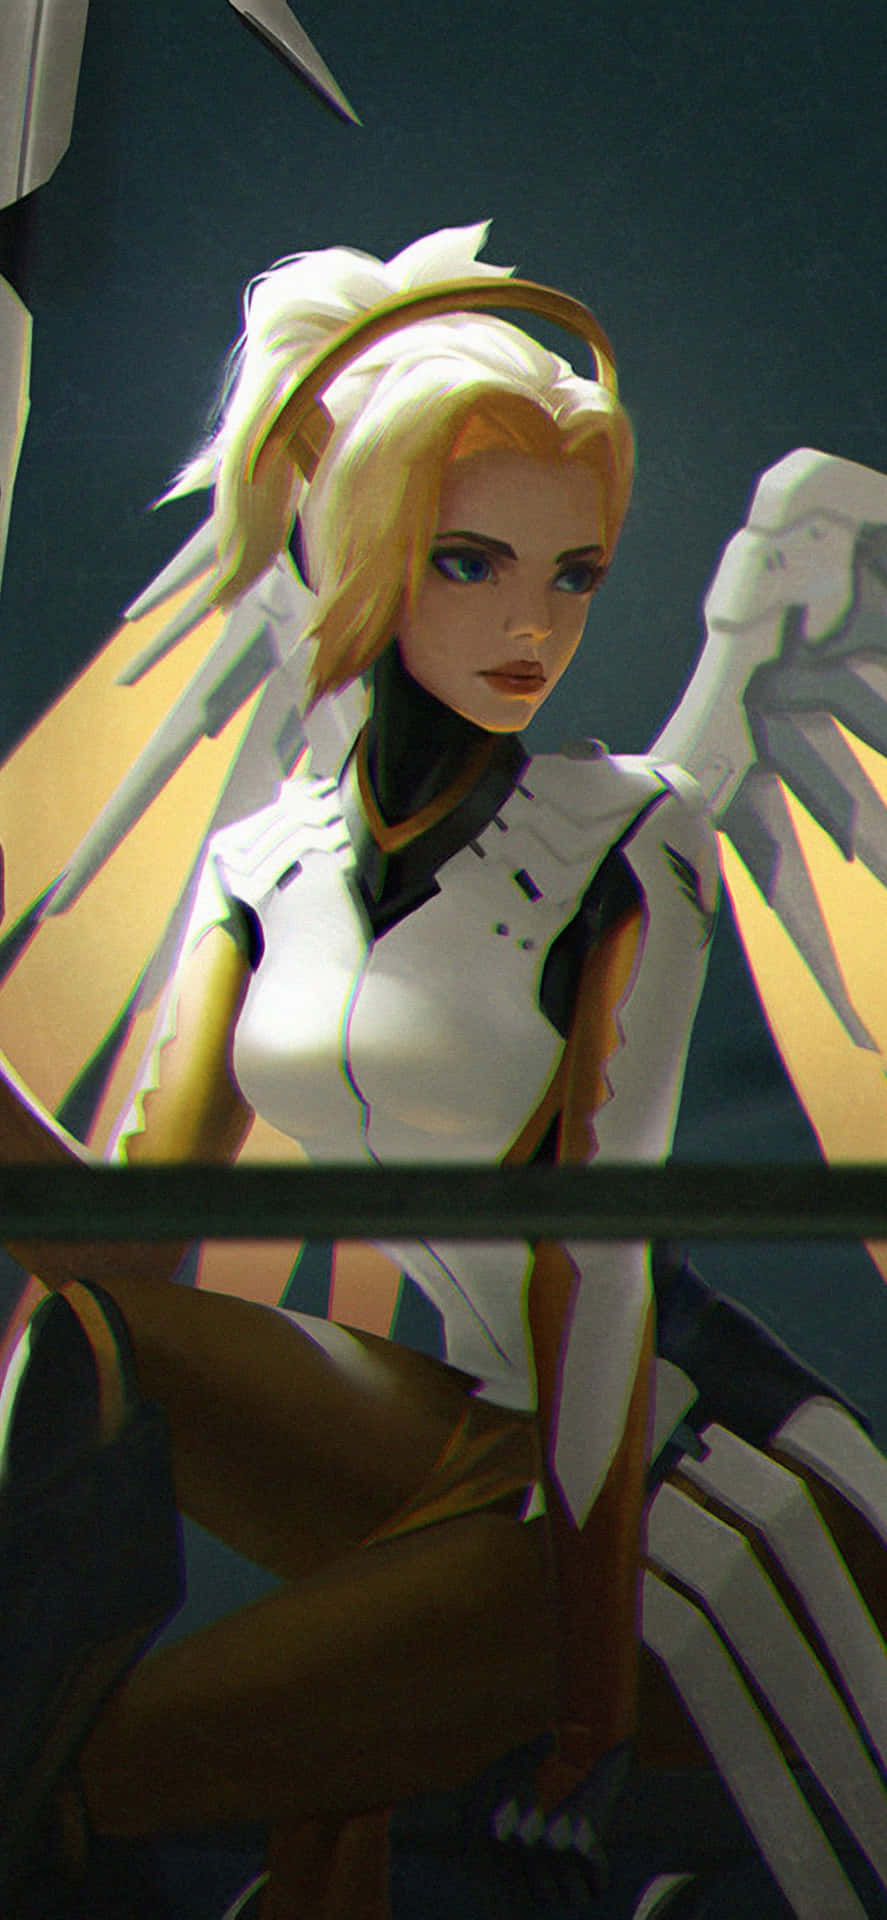 Overwatch Mercy Soaring Into Battle Background